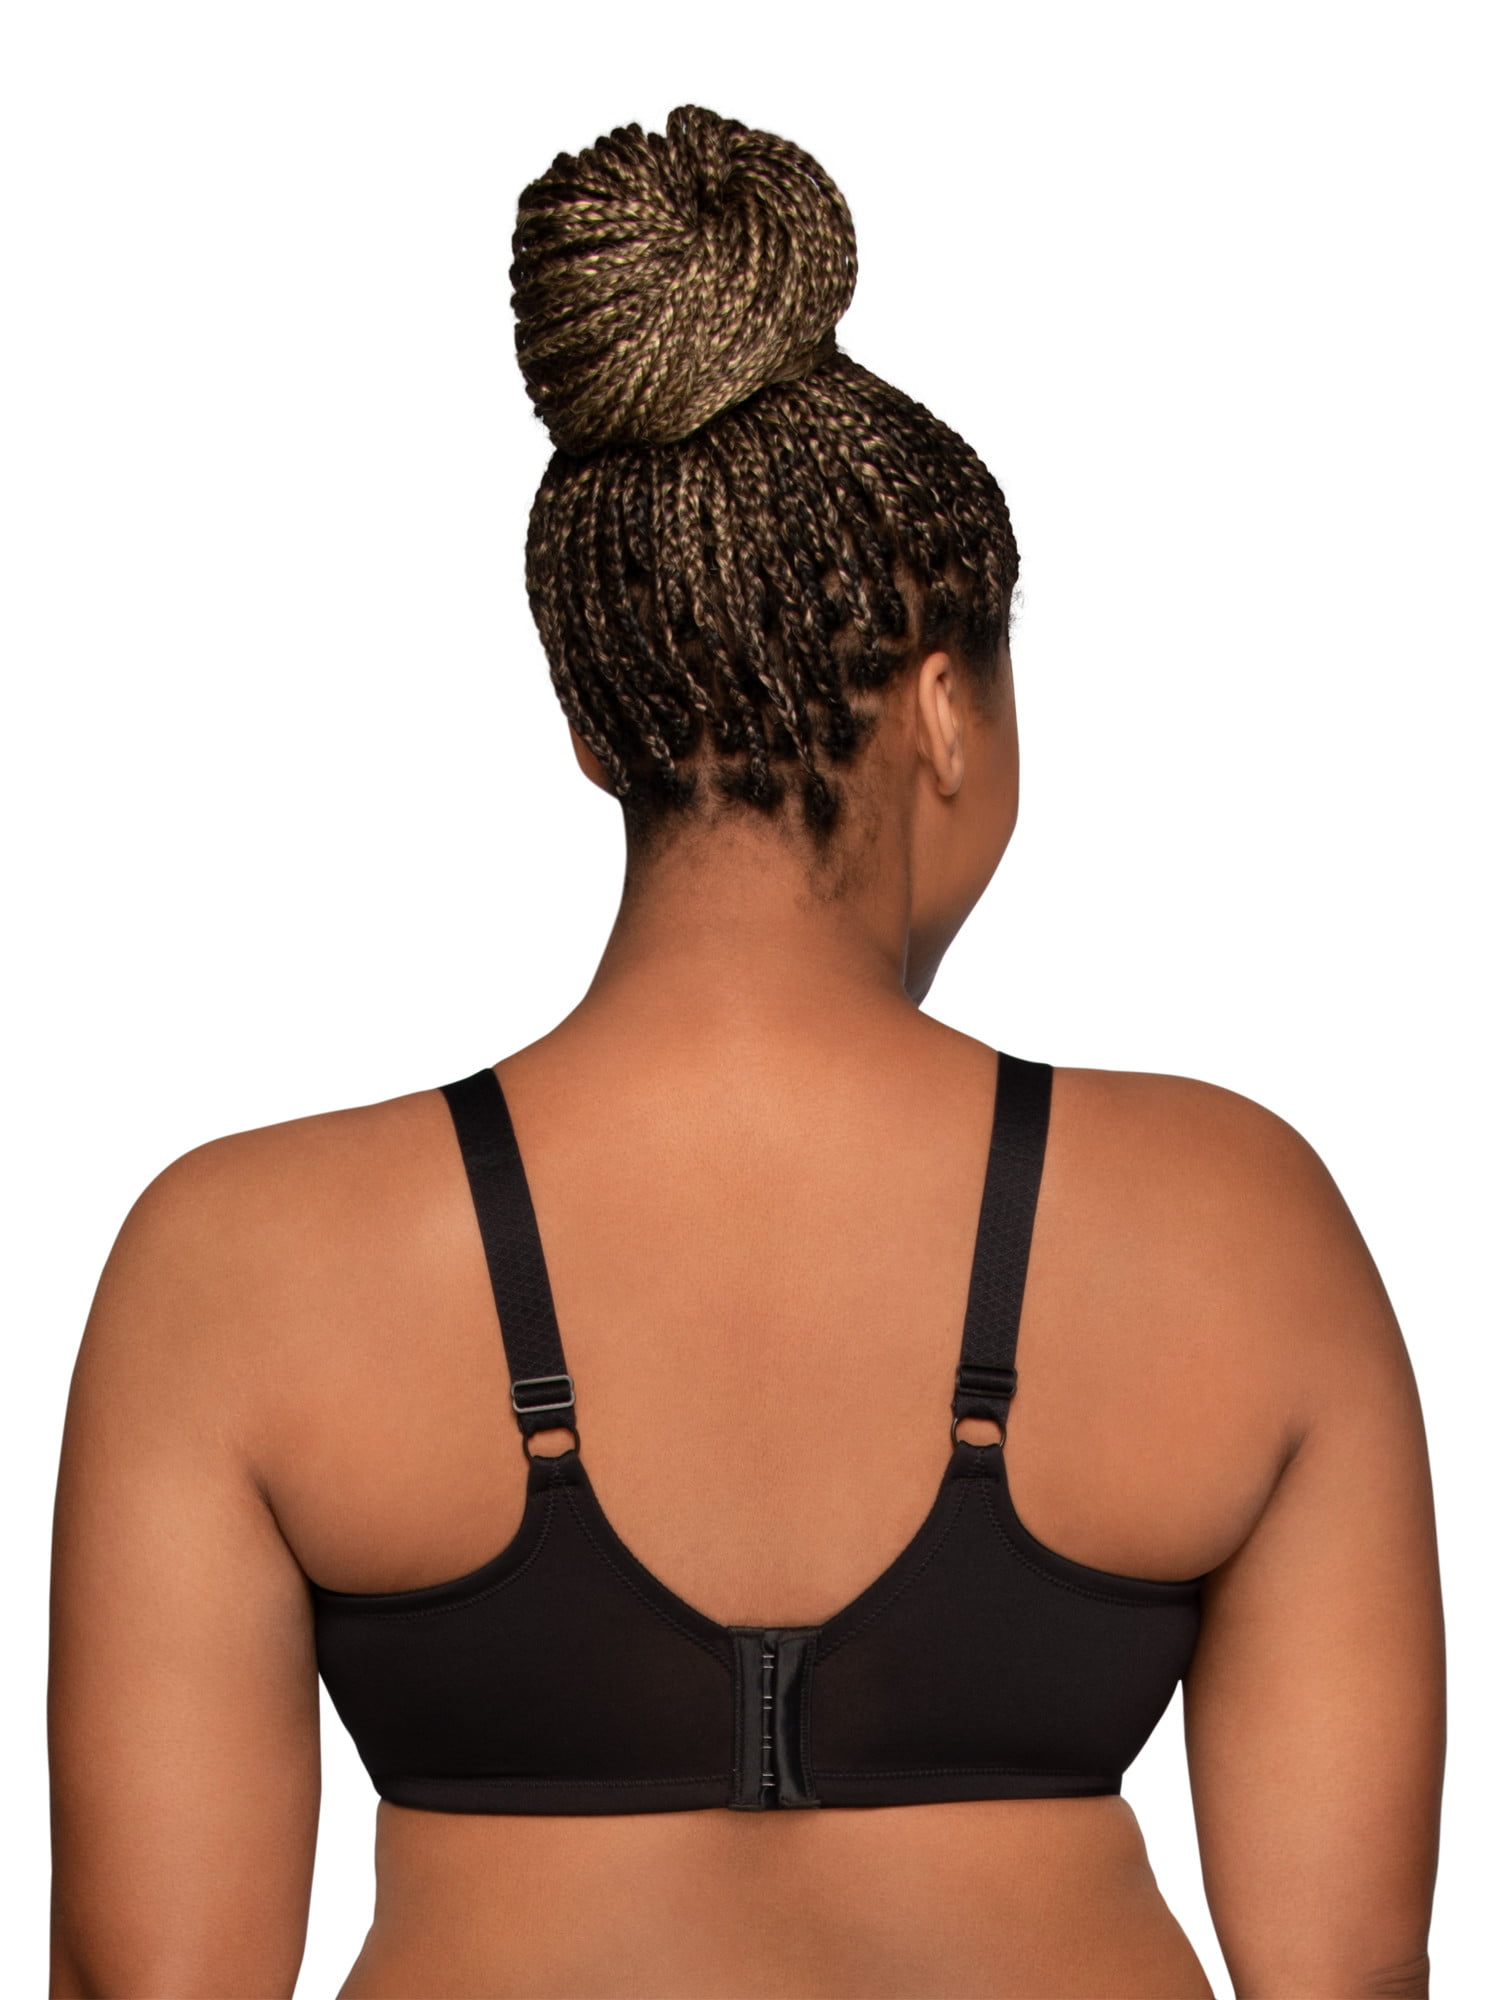 Vanity Fair Beauty Back Smoother Full Figure Bra Lace Detail Black Size  42DD - $19 - From Wendy